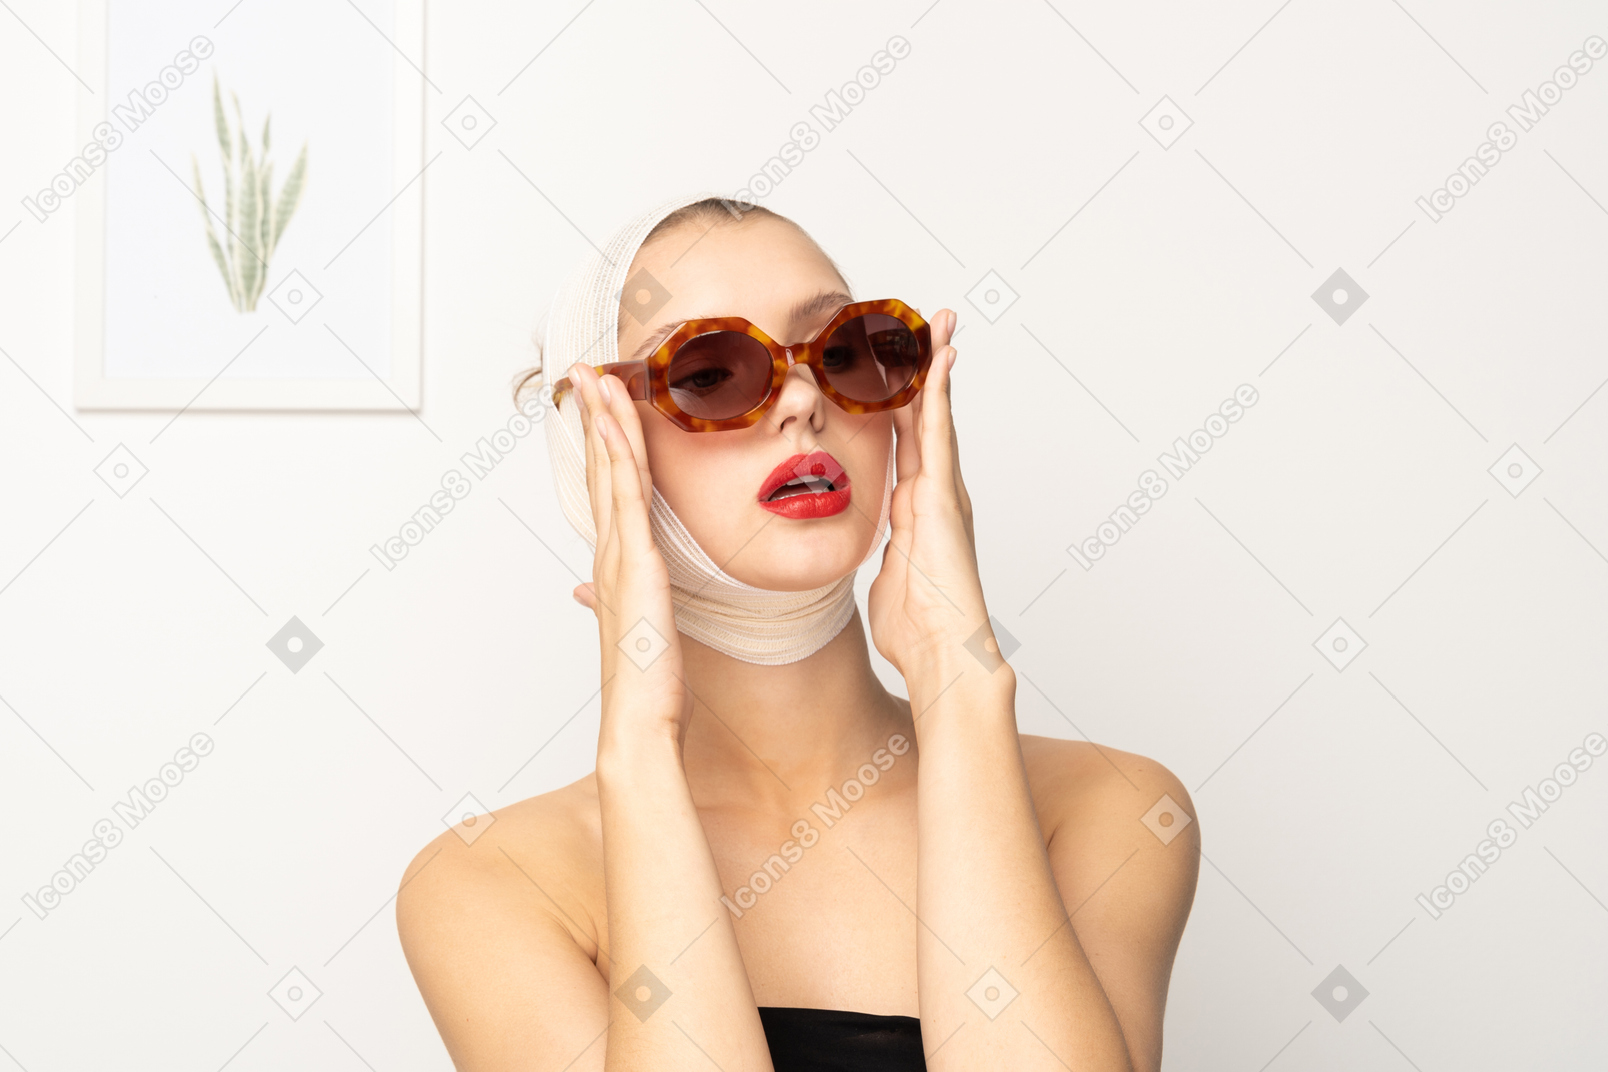 Young woman with head bandage wearing sunglasses